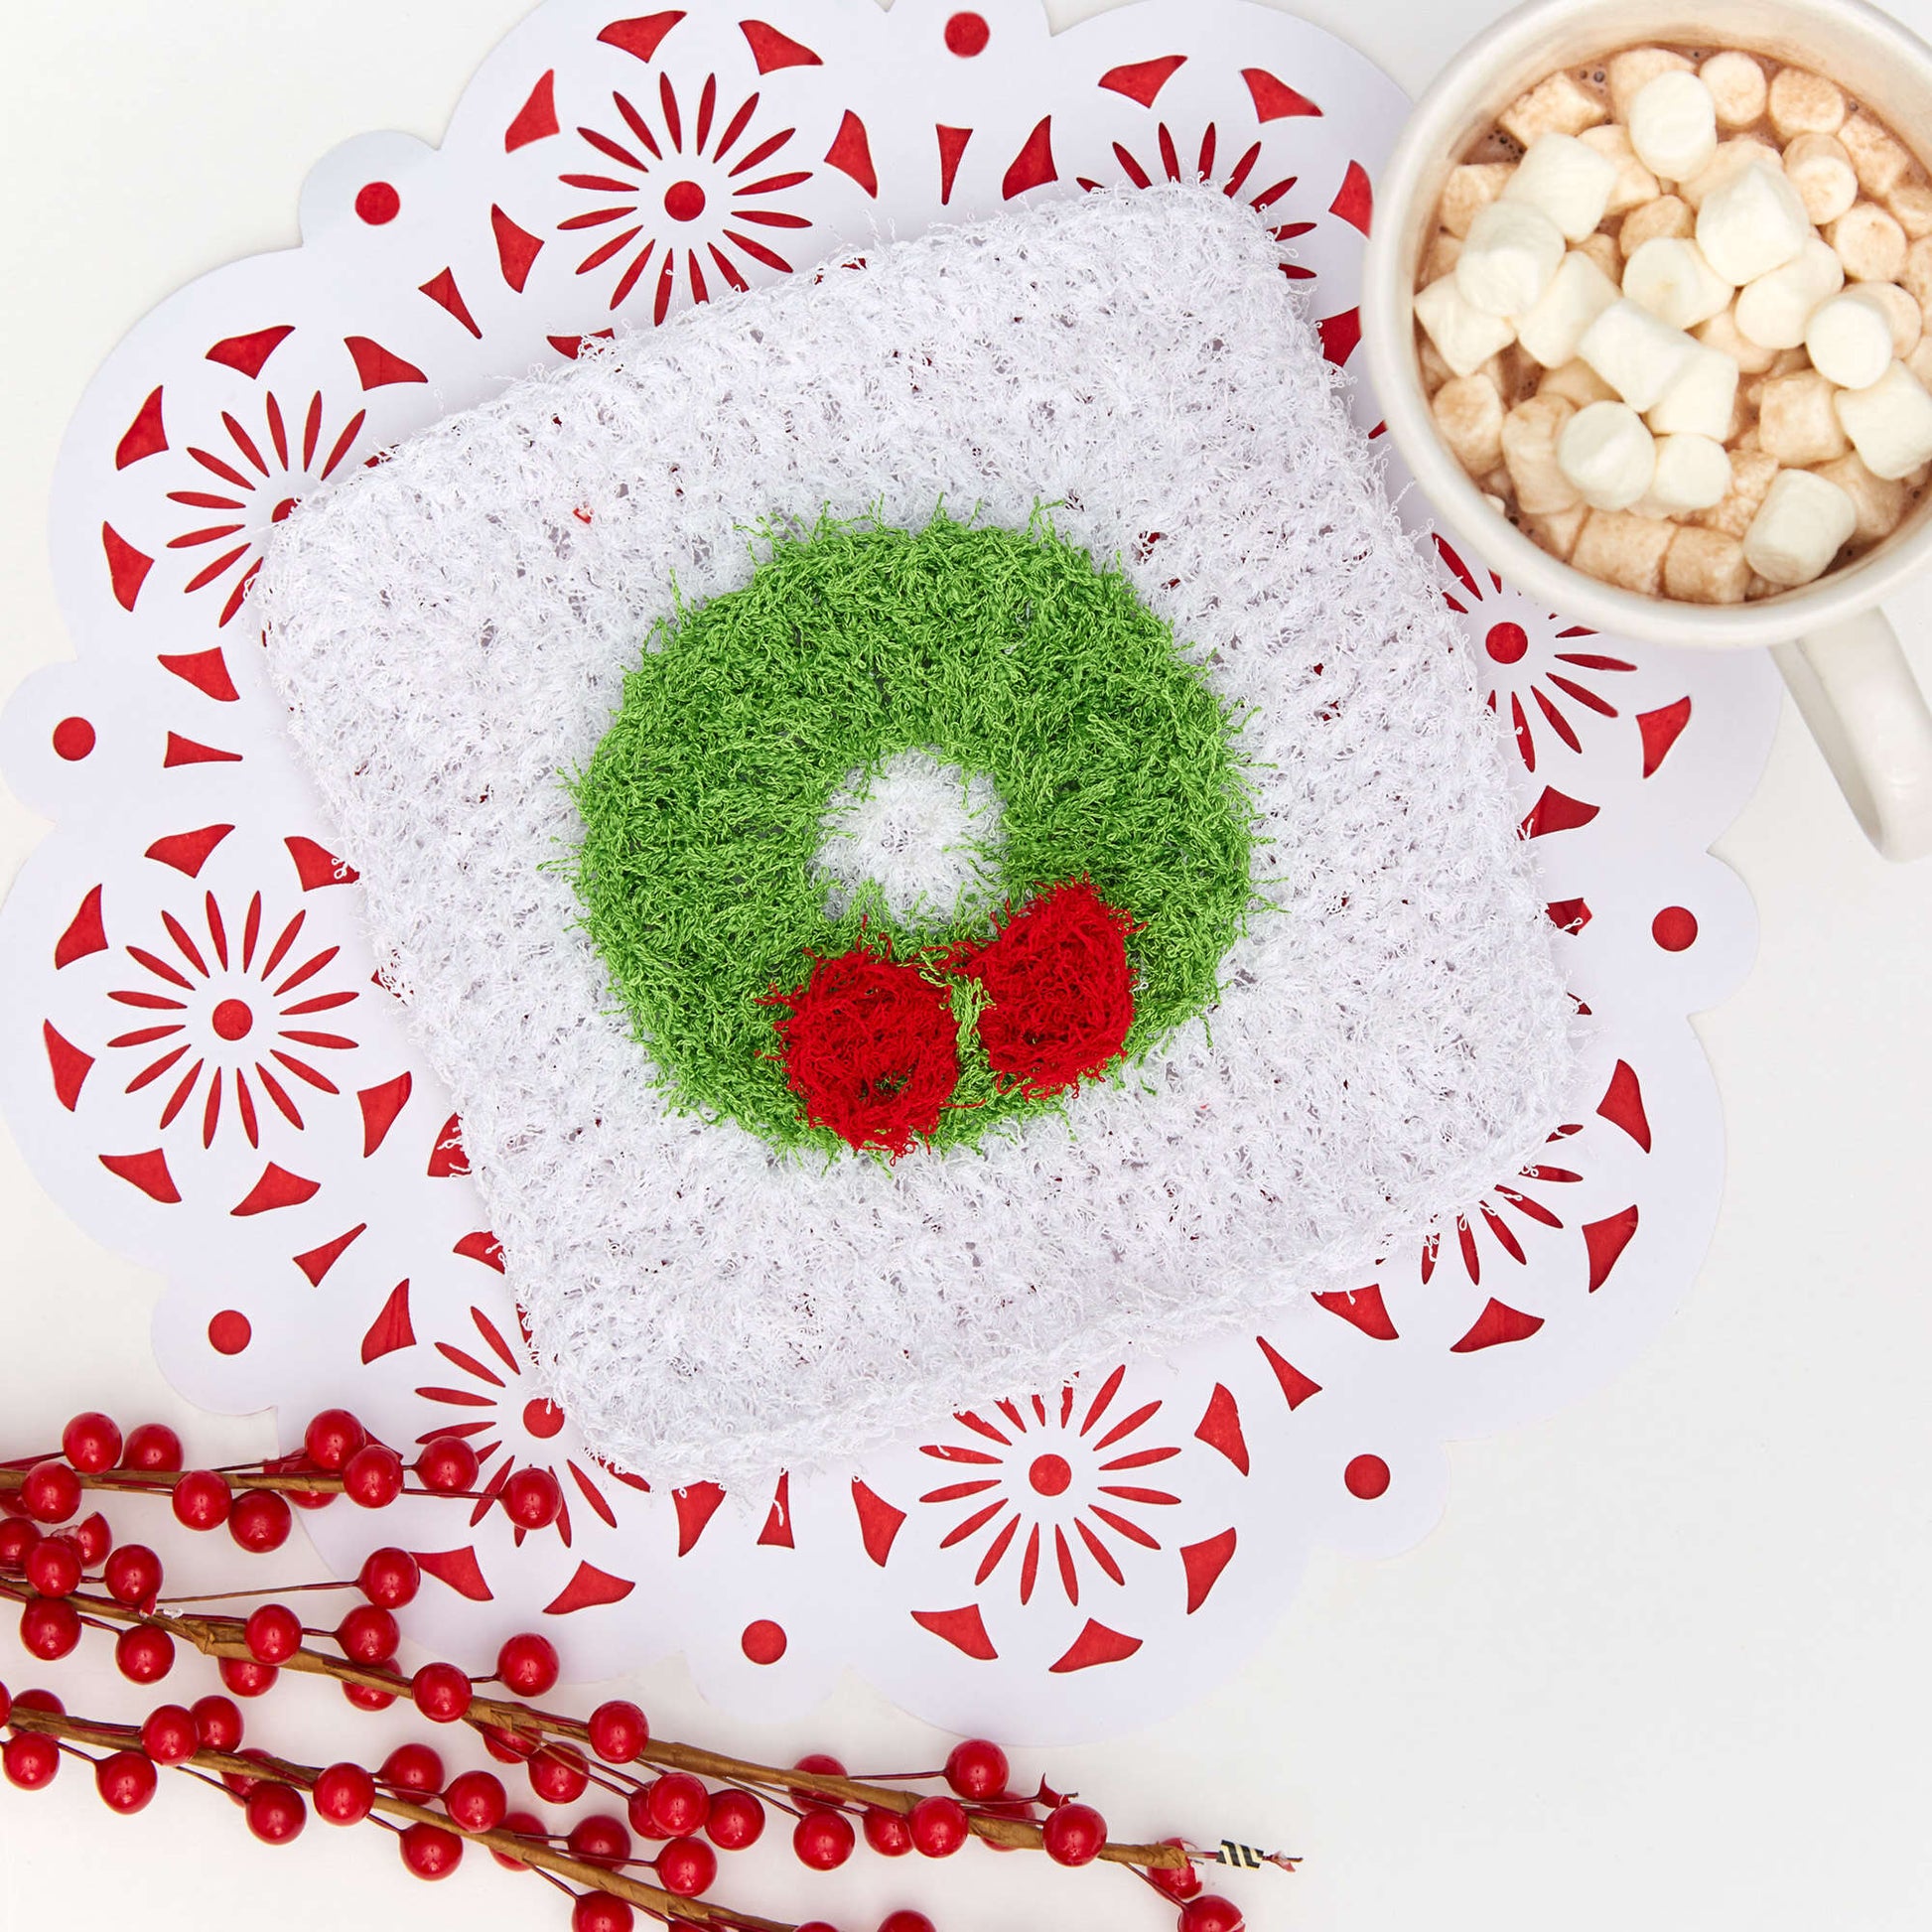 Red Heart Christmas Wreath Dishcloth Red Heart Christmas Wreath Dishcloth